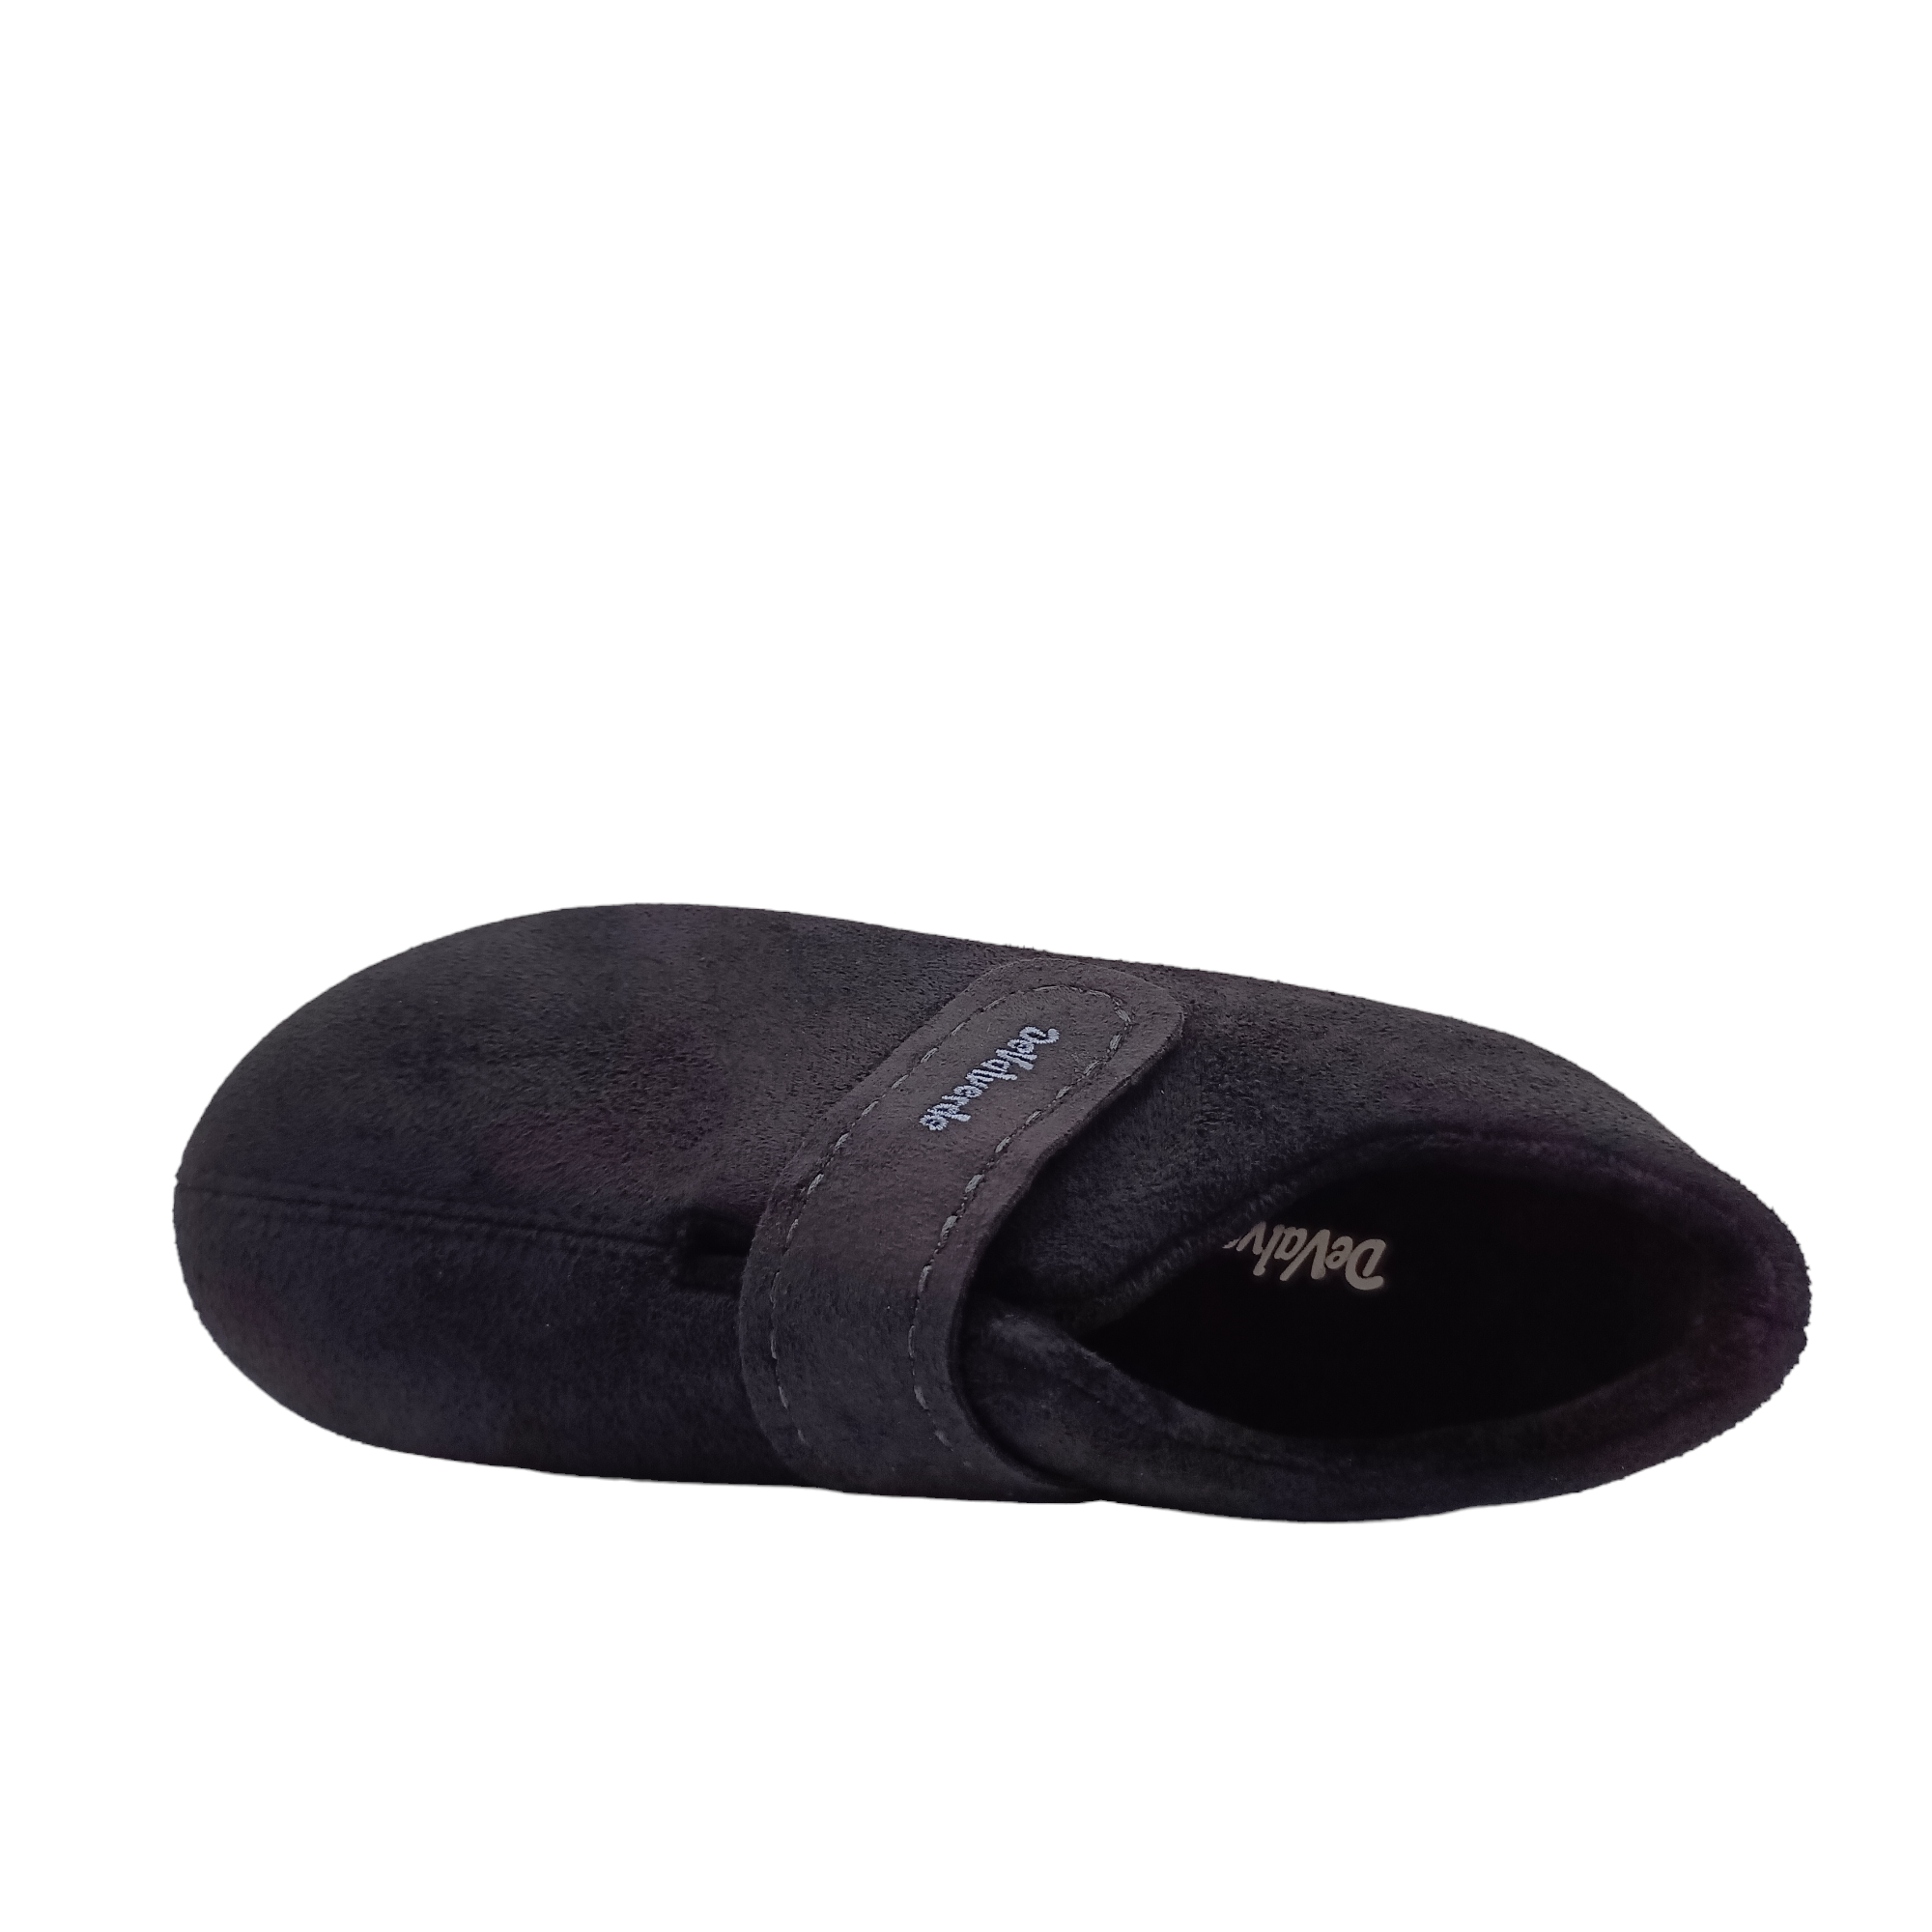 Shop Snuggles DeValverde - with shoe&me - from DeValverde - Slippers - Slipper, Winter, Womens - [collection]